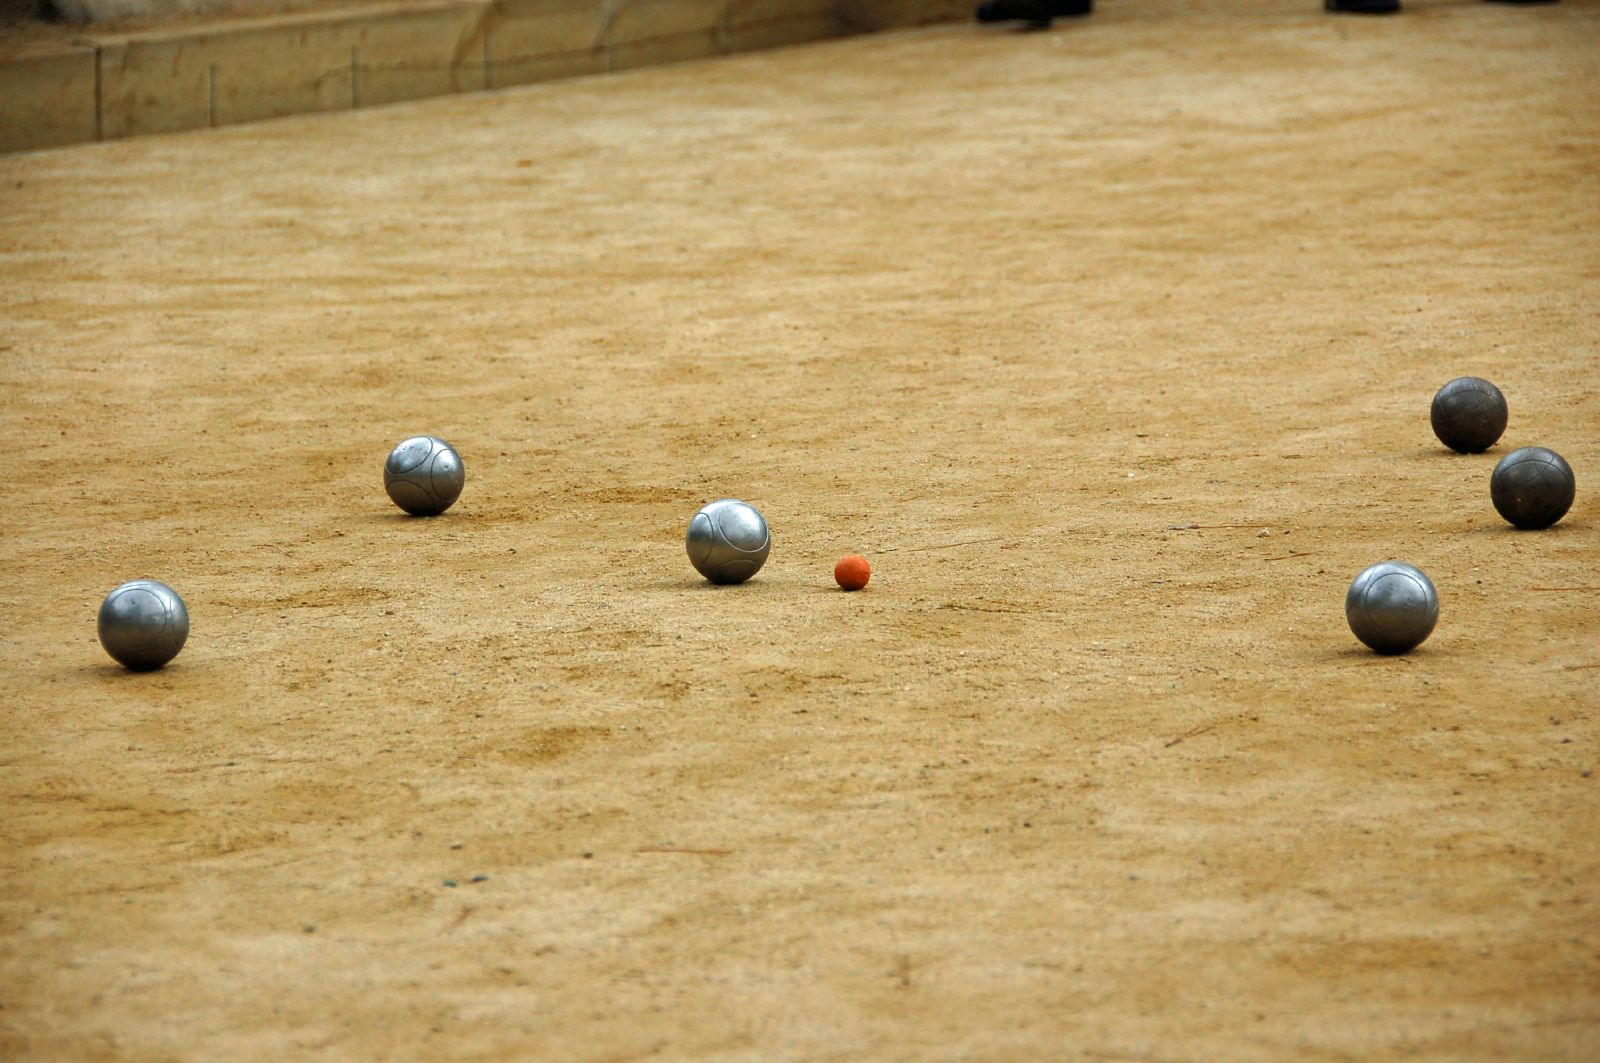 a group of silver balls in a sandy field